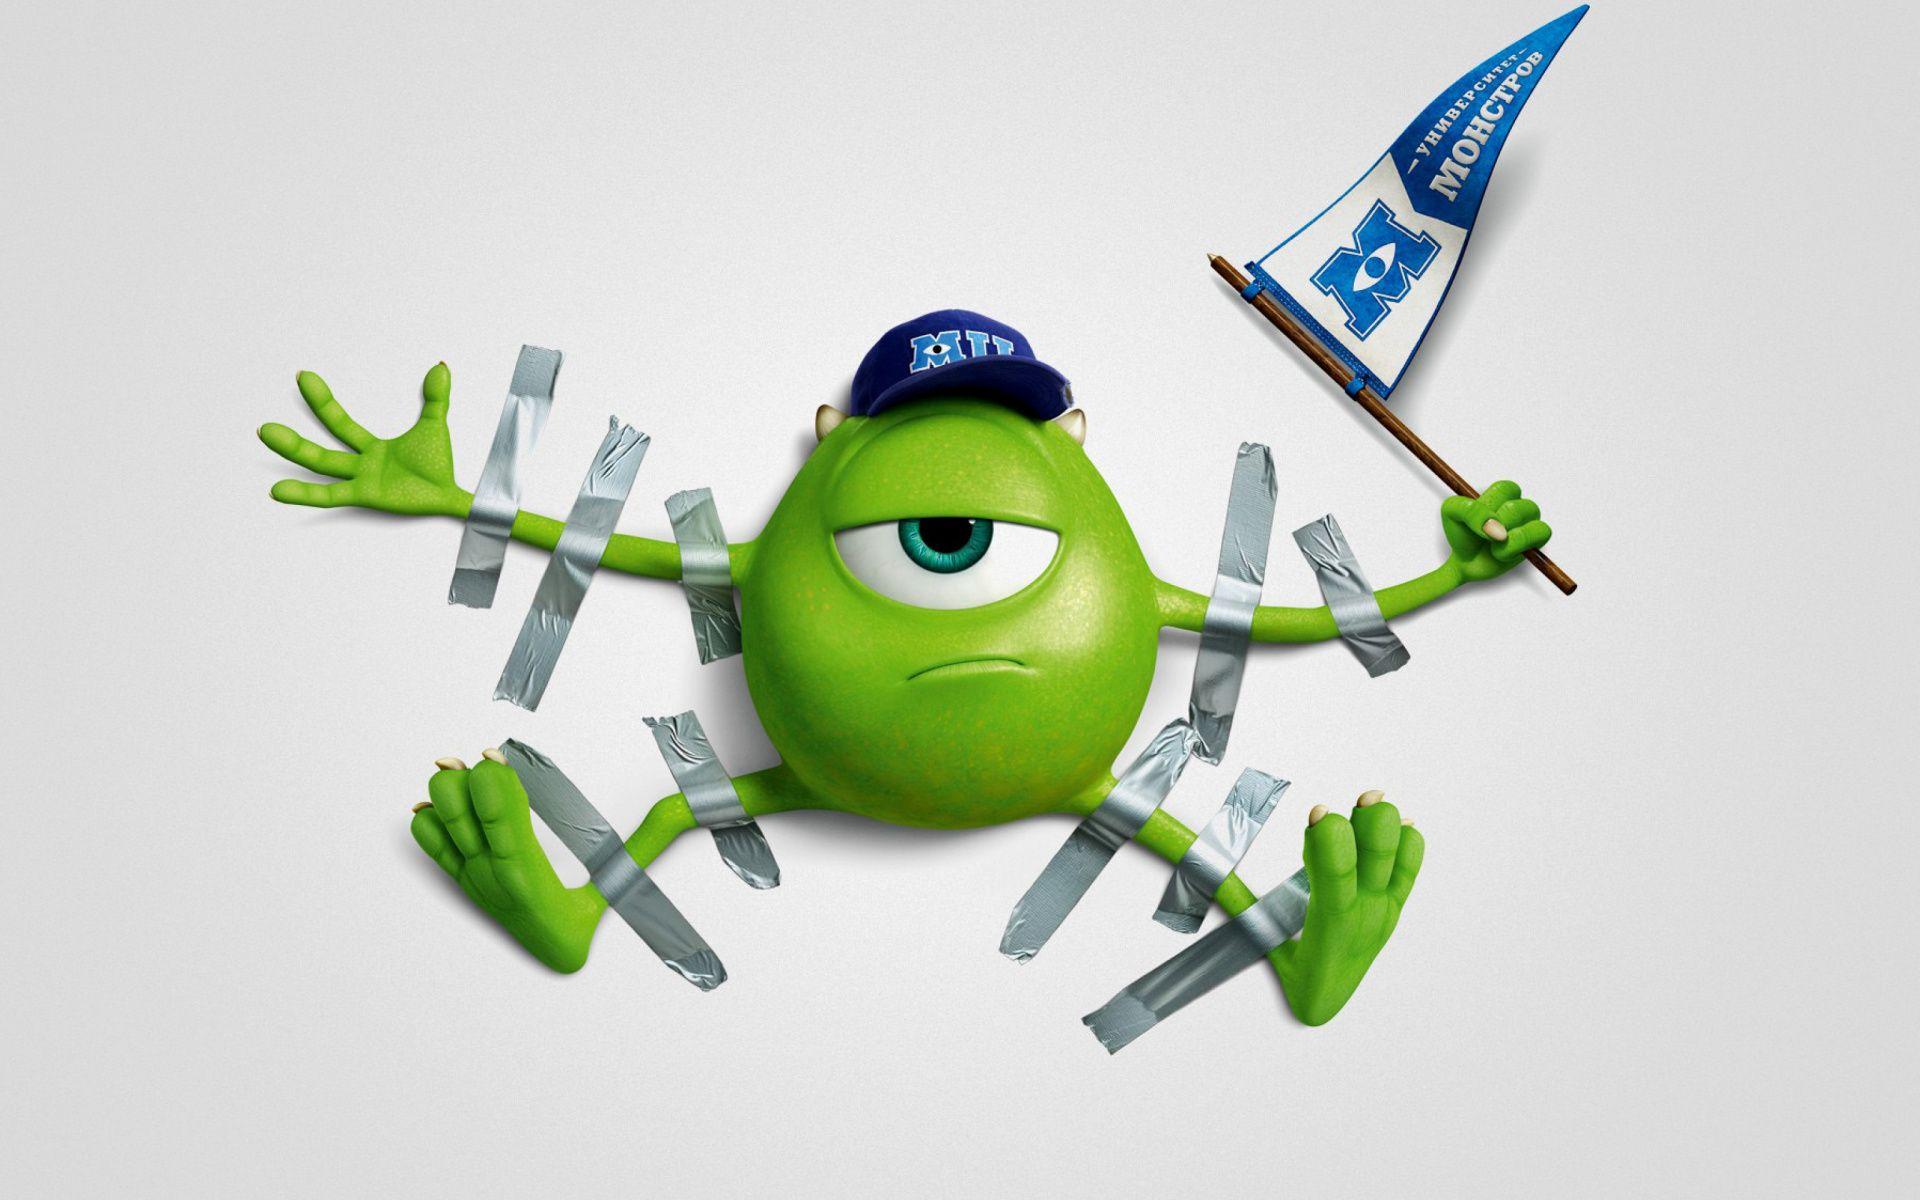 Monsters, Inc. Wallpapers